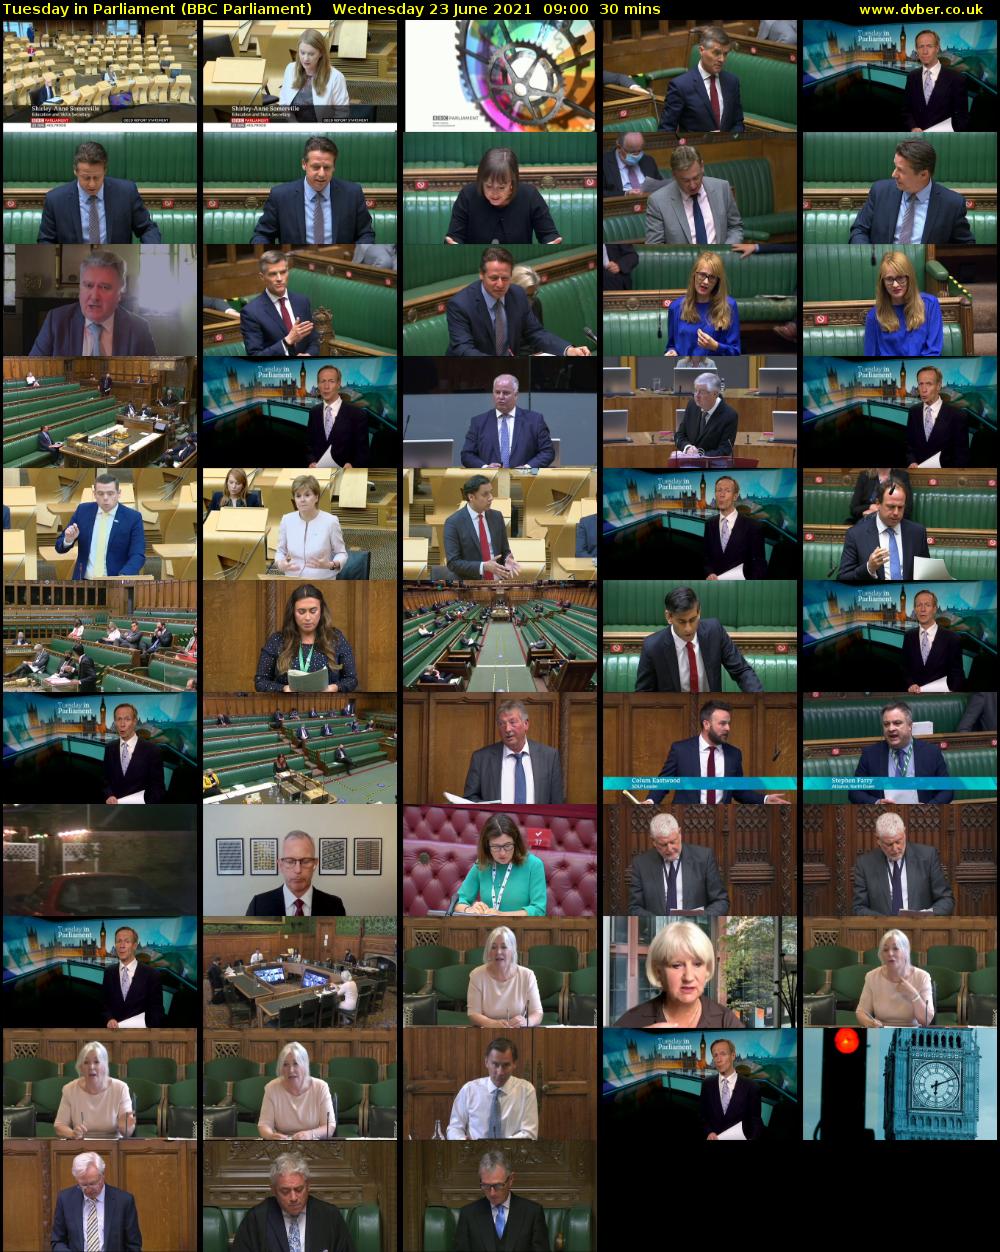 Tuesday in Parliament (BBC Parliament) Wednesday 23 June 2021 09:00 - 09:30